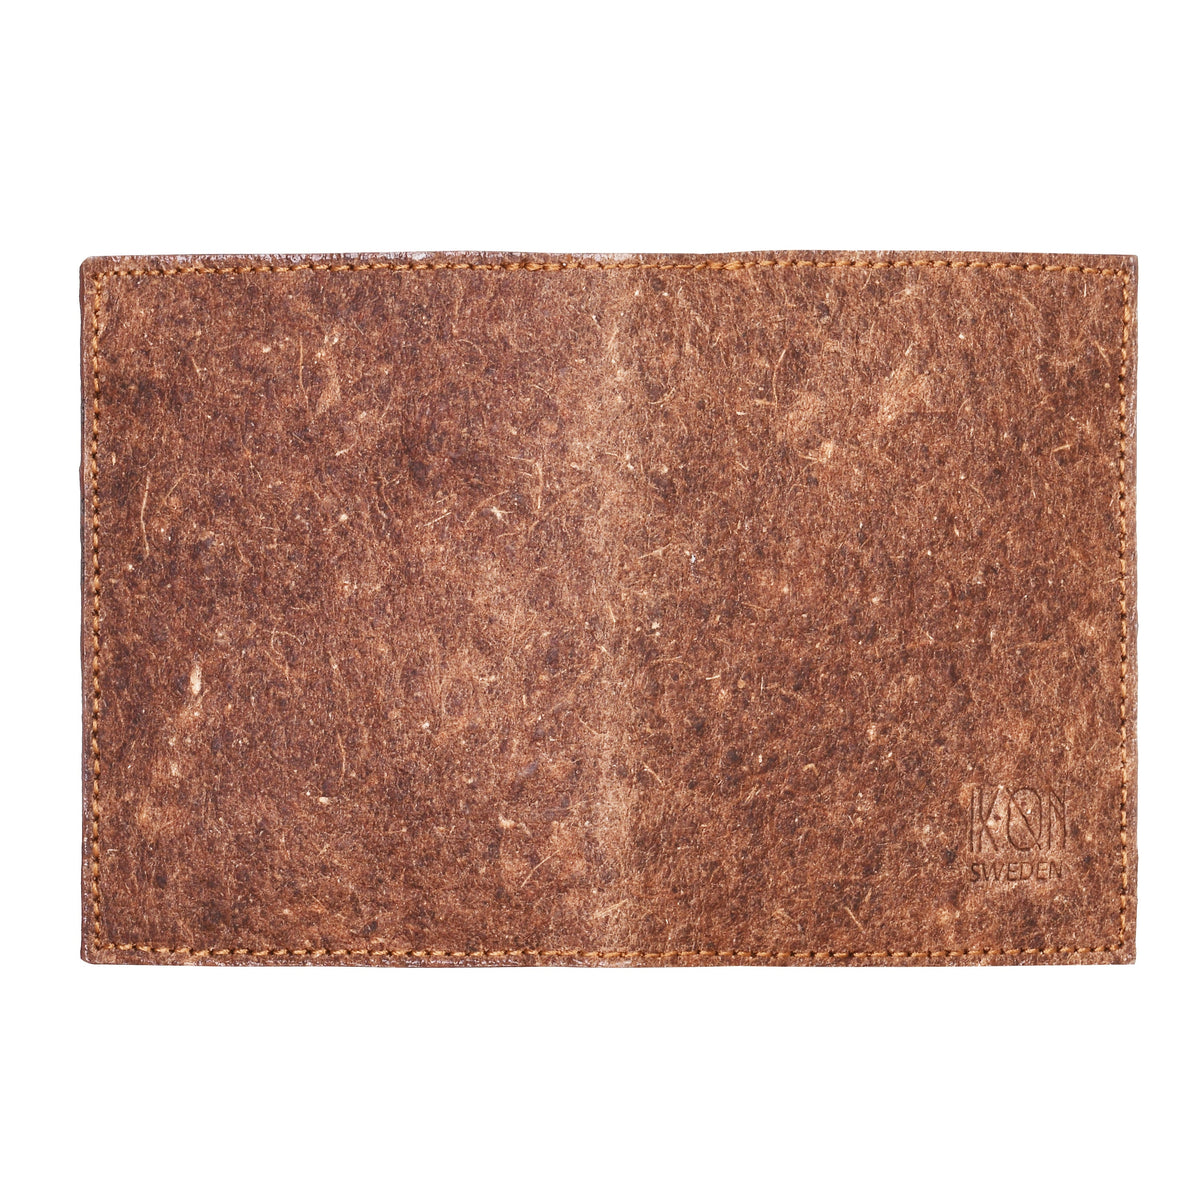 Coconut Leather Classic Wallet - Cutch Brown